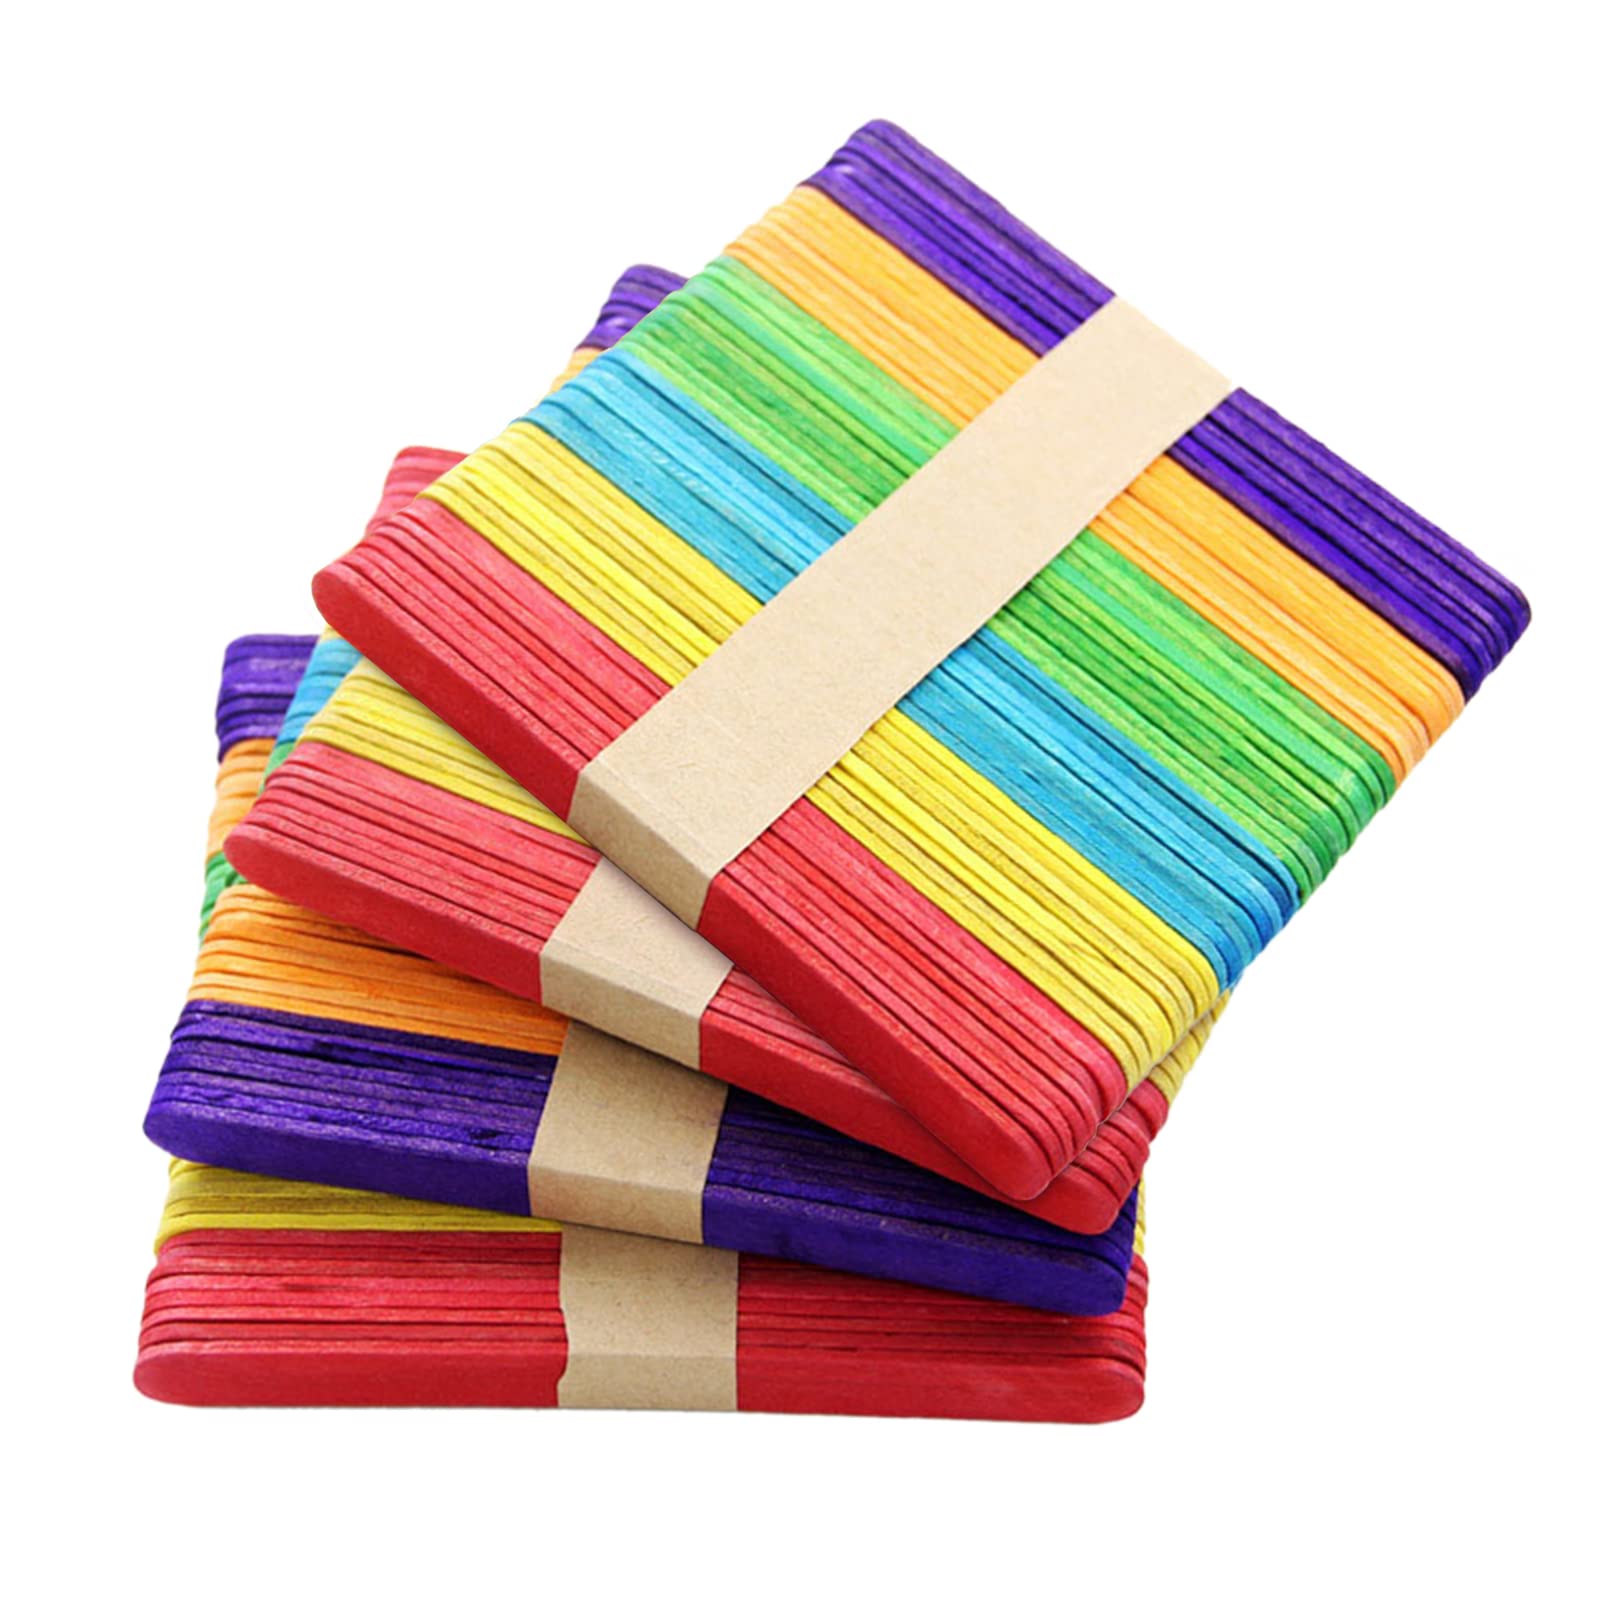 Colored Popsicle Sticks for Crafts - 200 Count 4.5 Inch Multi-Purpose  Wooden Sticks